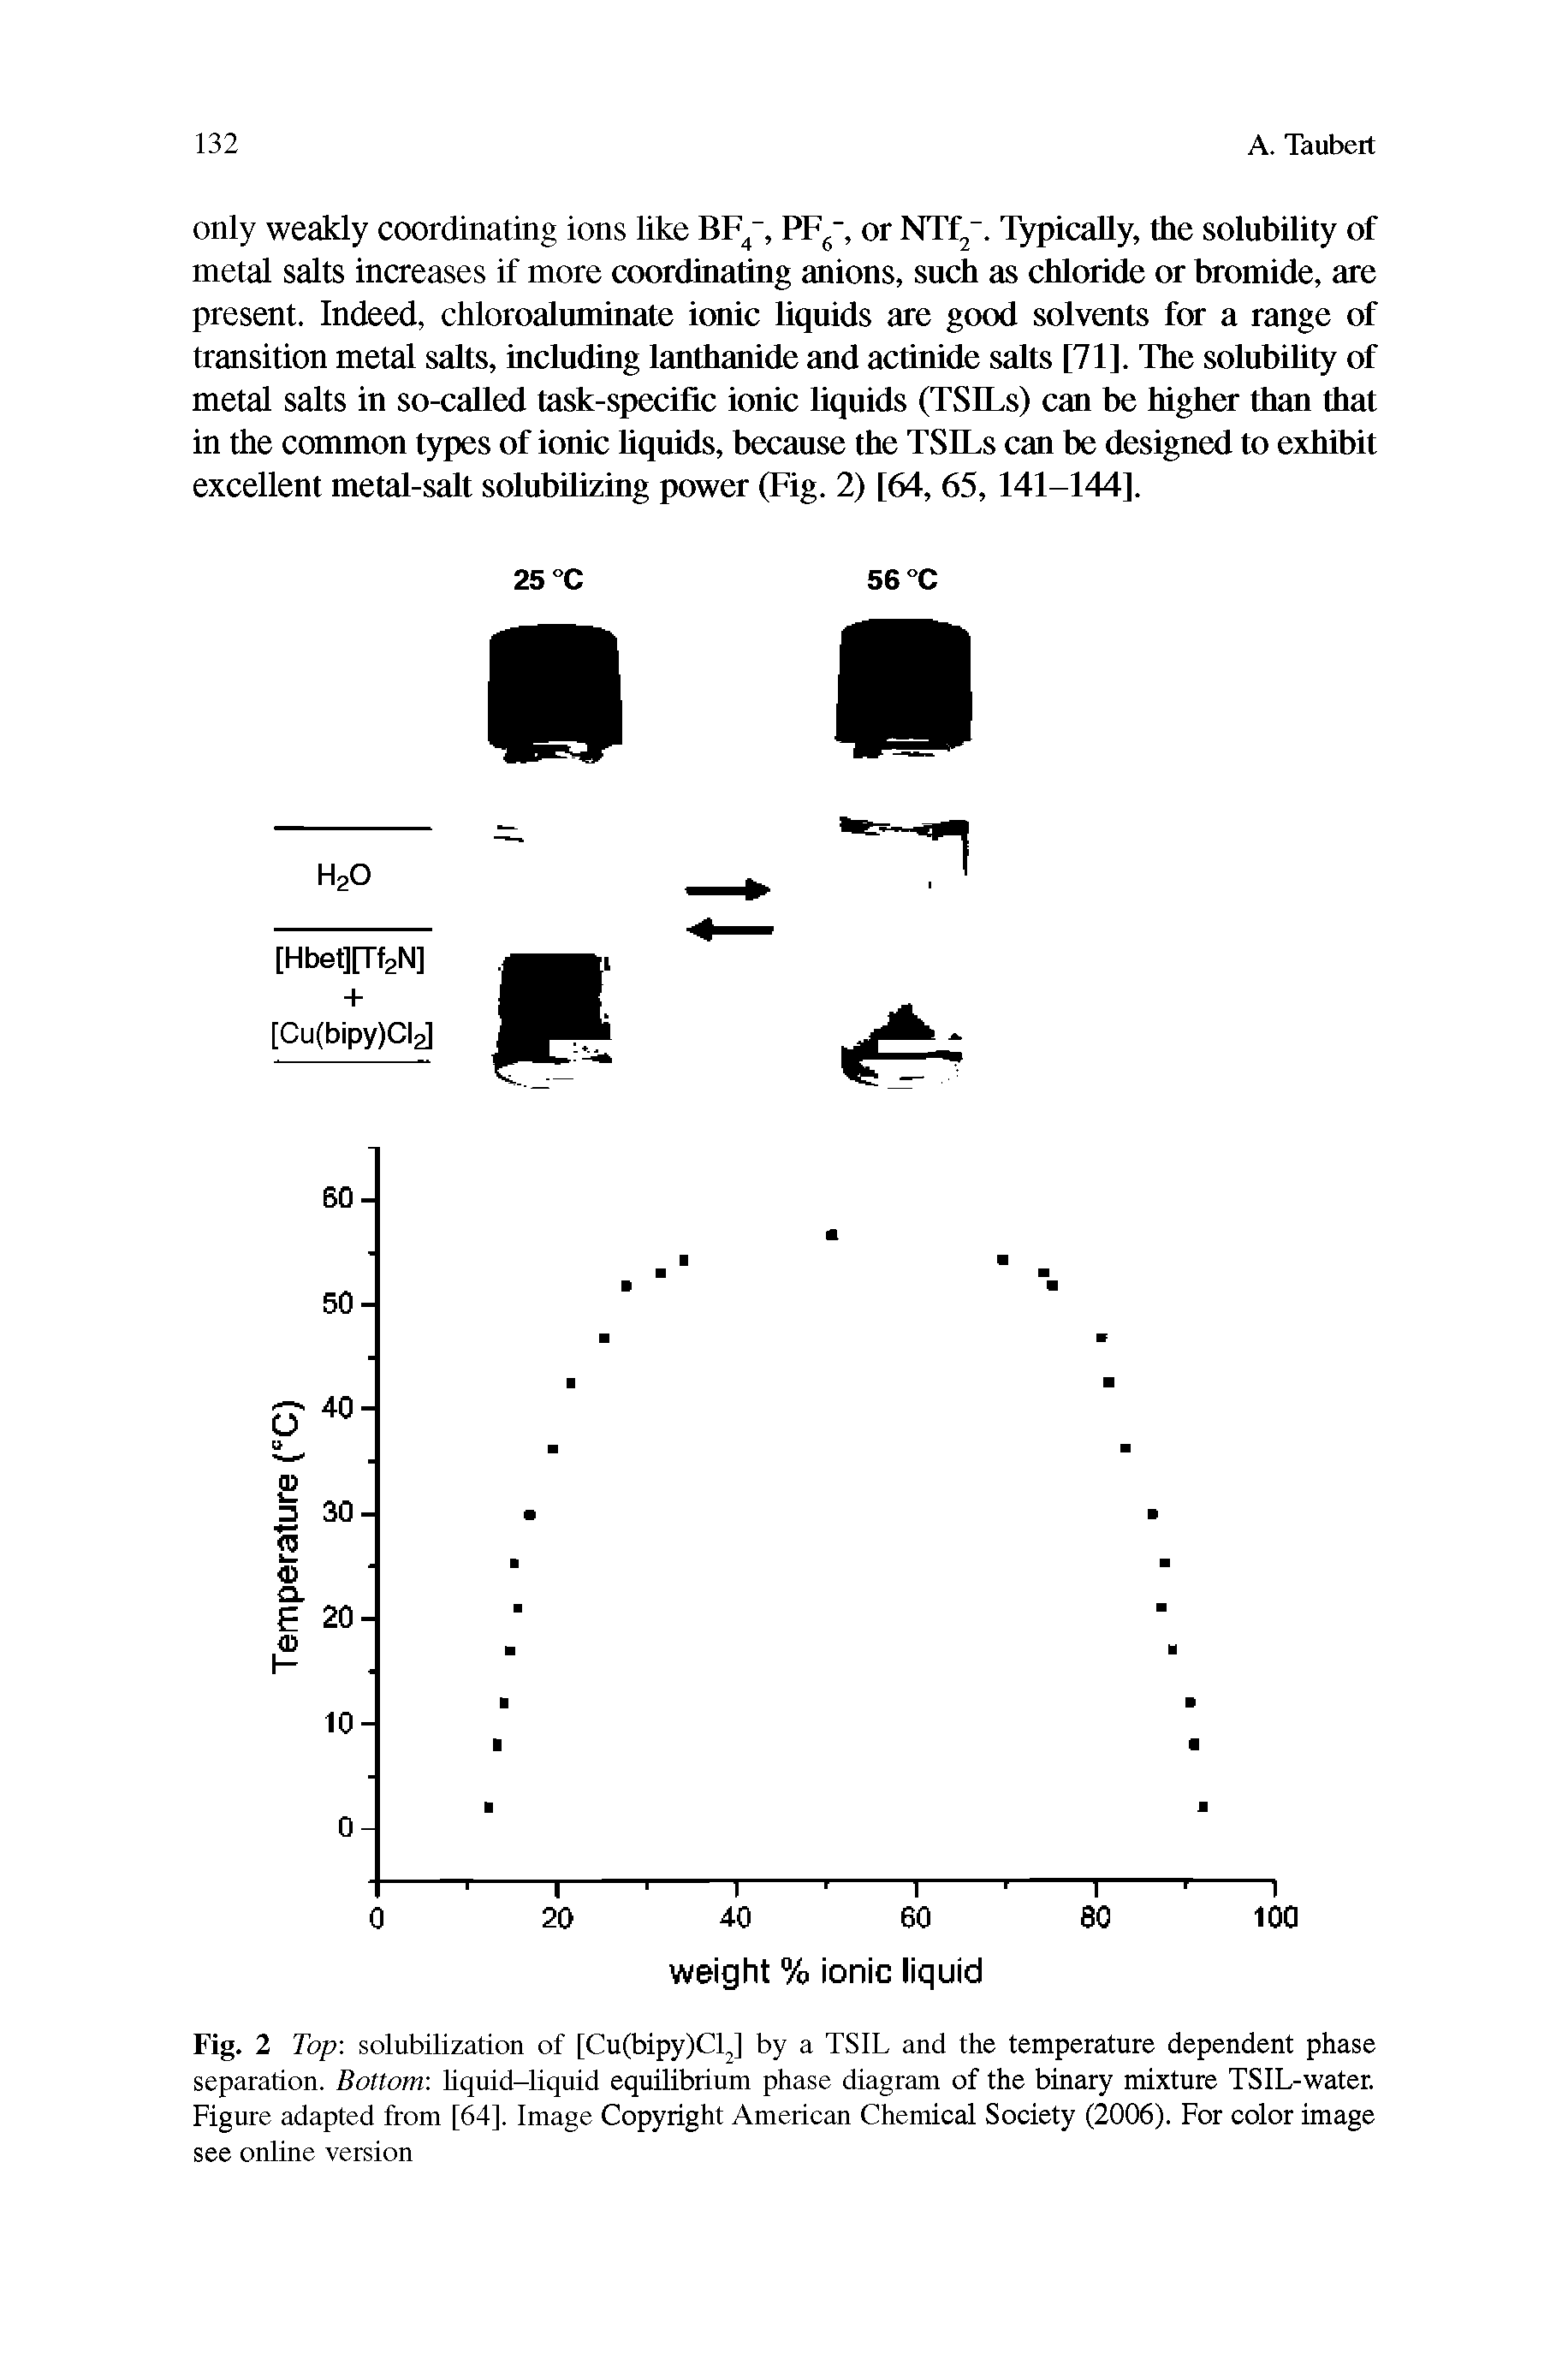 Fig. 2 Top solubilization of [Cu(bipy)Cl2] by a TSIL and the temperature dependent phase separation. Bottom liquid-liquid equilibrium phase diagram of the binary mixture TSIL-water. Figure adapted from [64]. Image Copyright American Chemical Society (2006). For color image see online version...